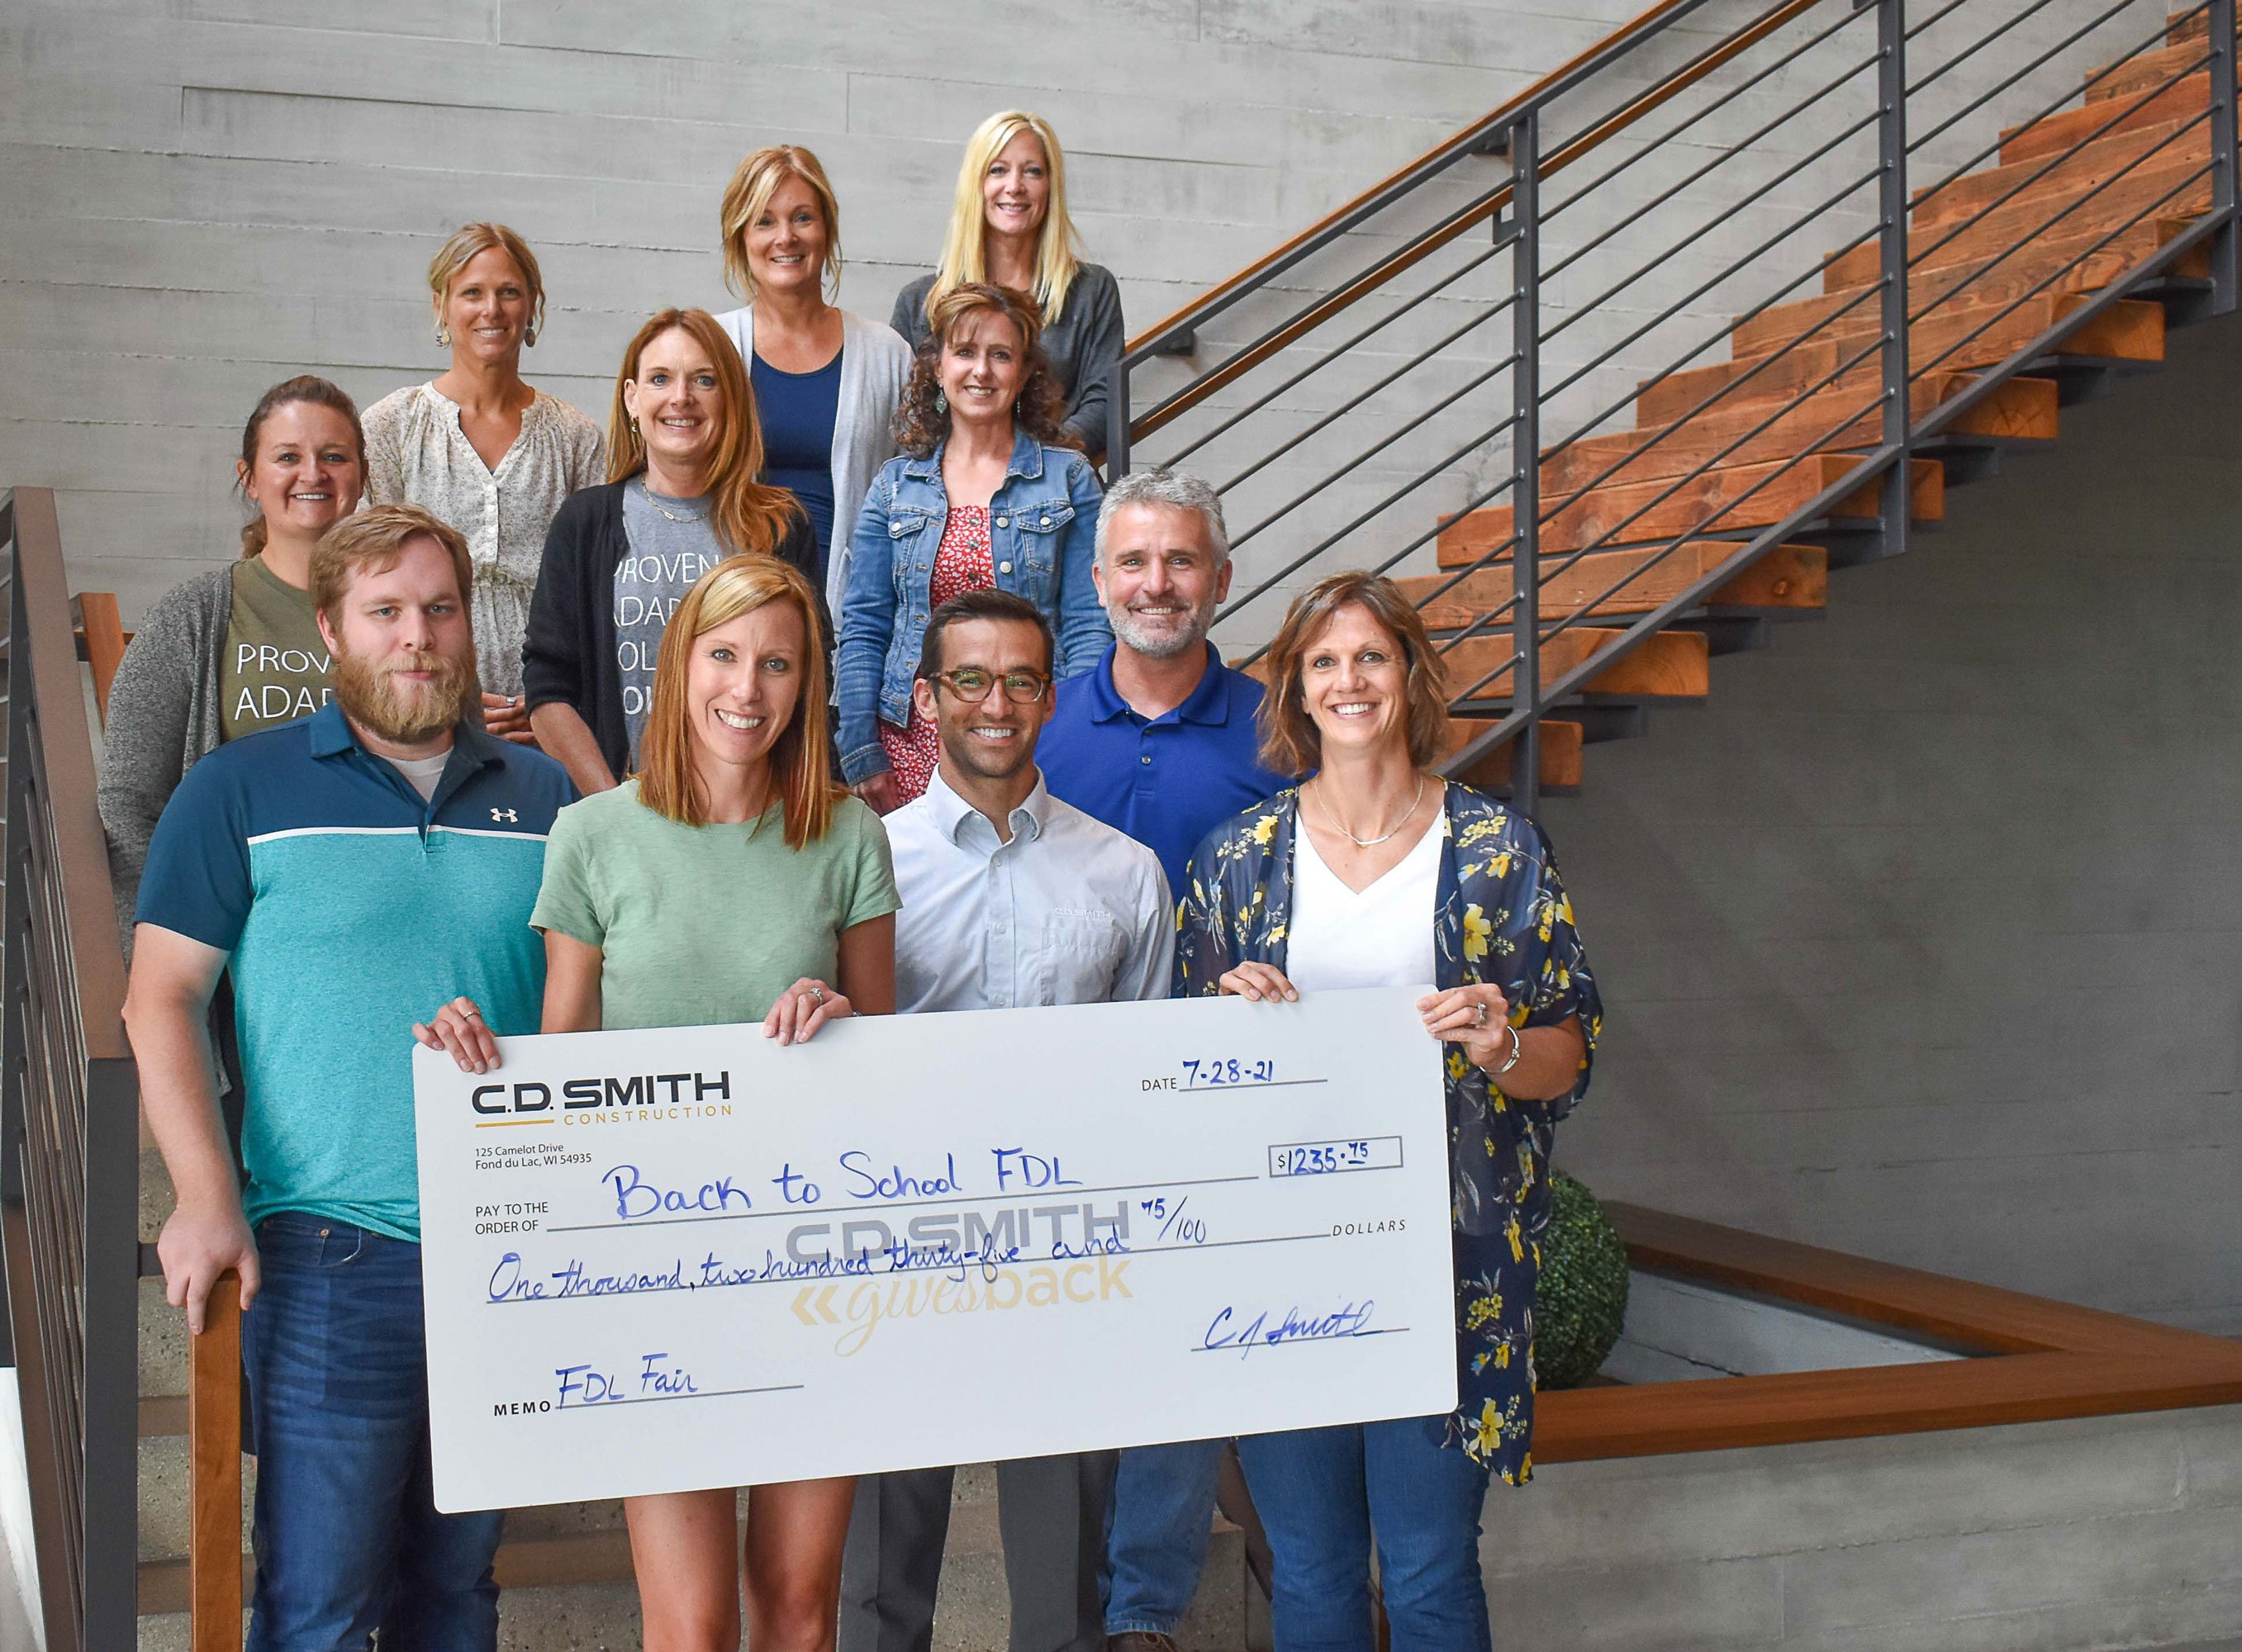 C.D. Smith Construction Gives Back volunteering at Fond du Lac County Fair & with check presentation from tips for the Back to School FDL Area program.